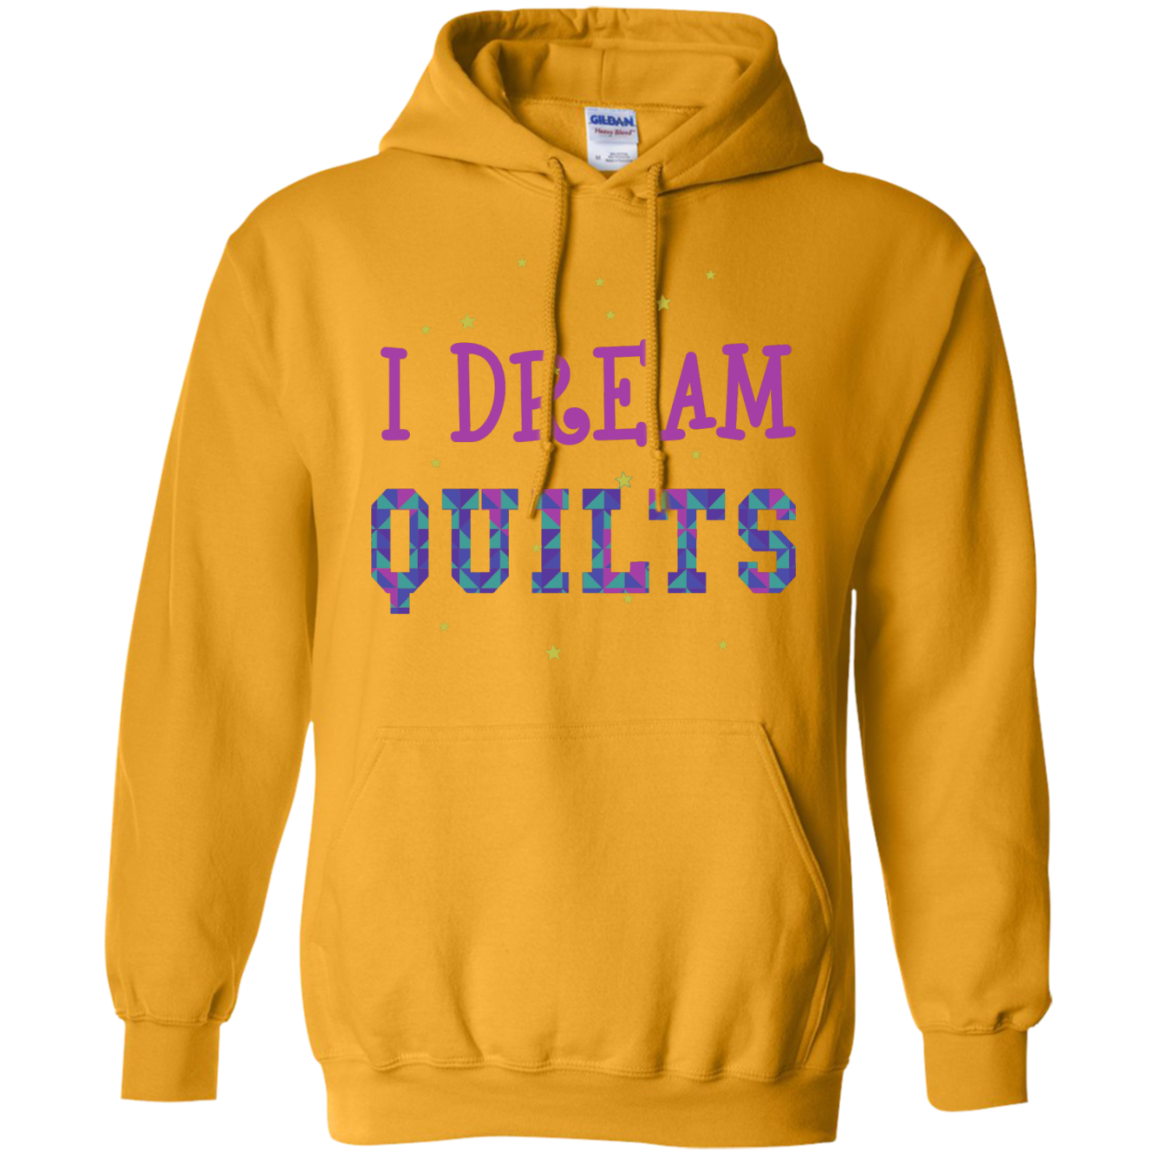 I Dream Quilts Pullover Hoodie - Crafter4Life - 7